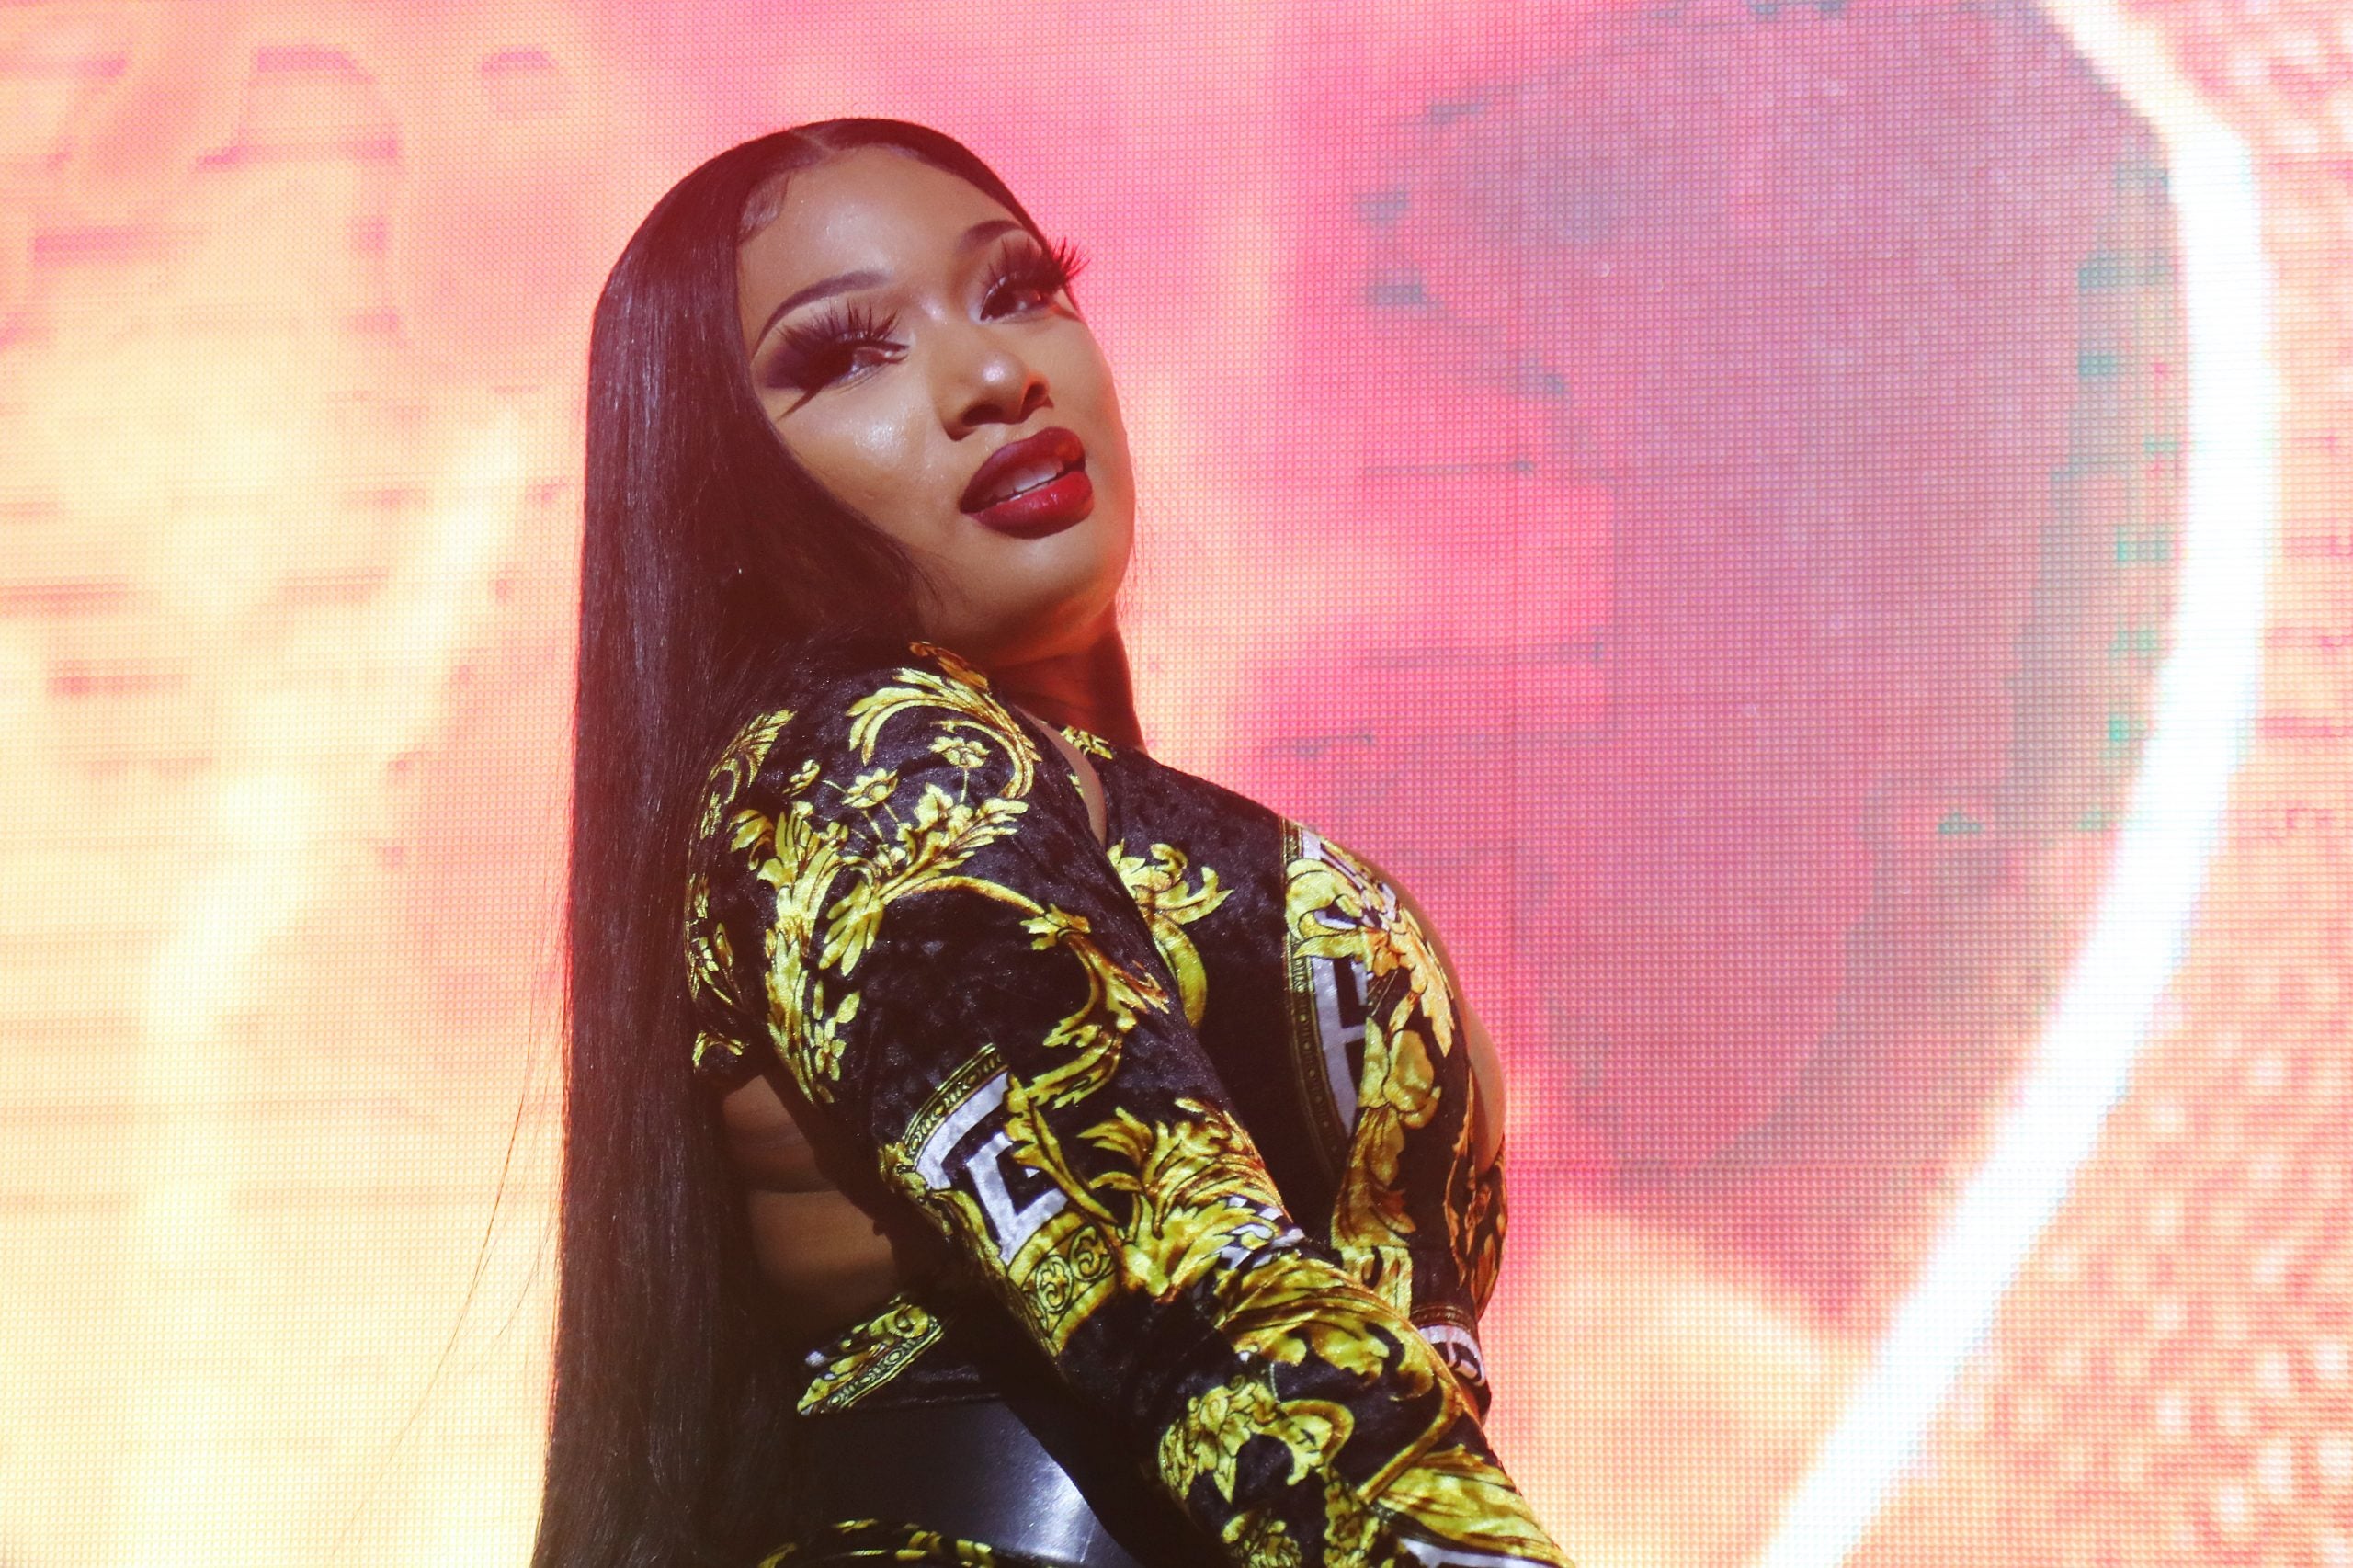 Megan Thee Stallion's Legal Issues Are Another Example Of Rich People Profiting Off The Uninformed